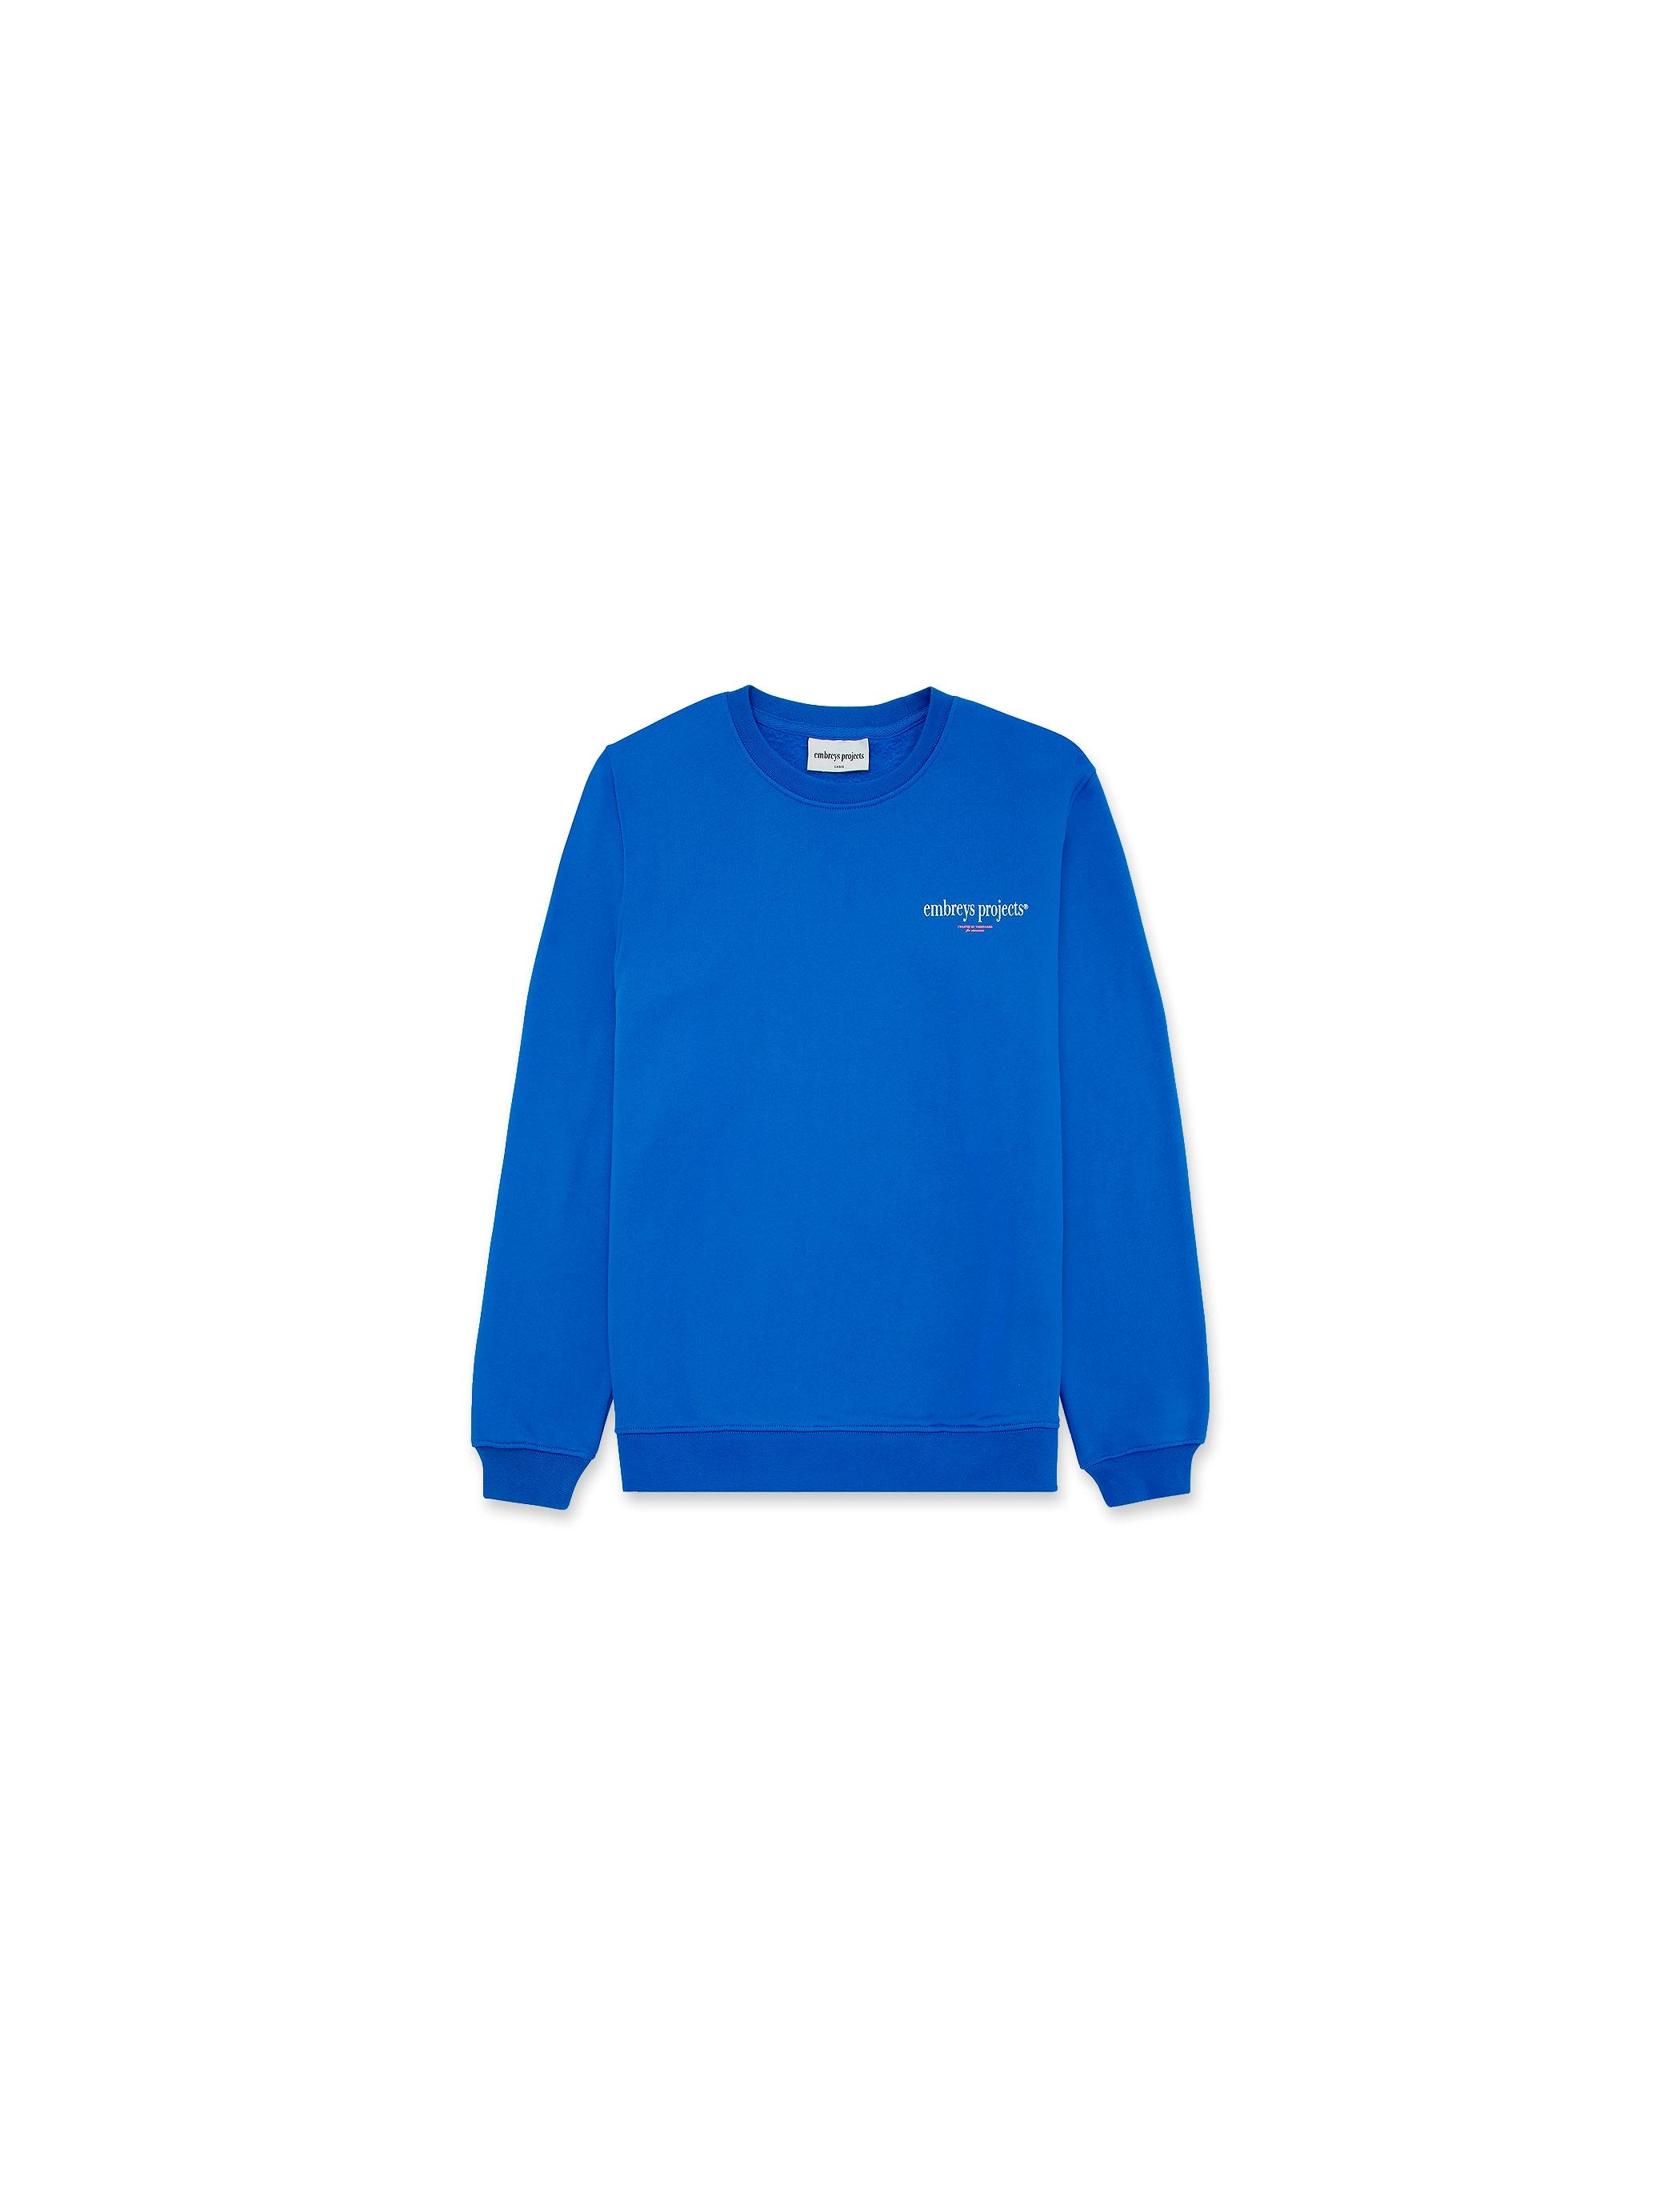 TIME CN SWEATSHIRT - BLUE LOLITE - Embreys Projects